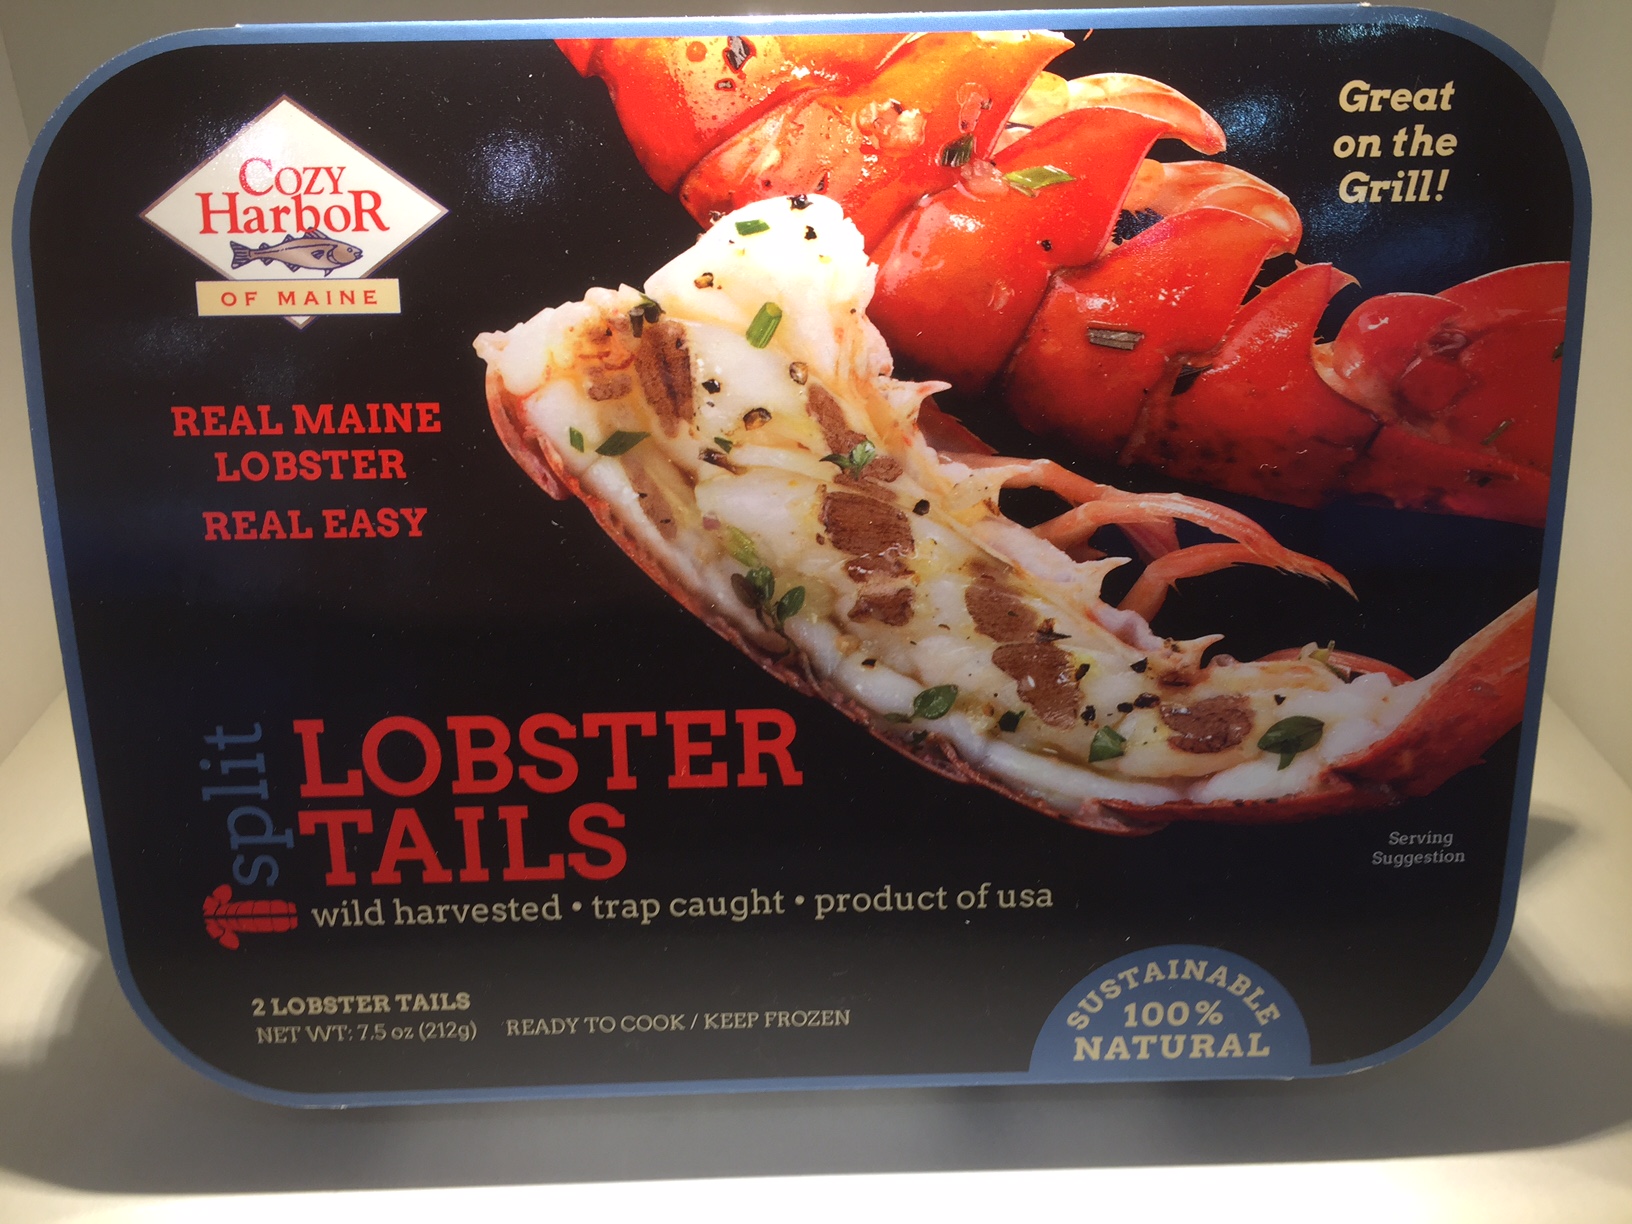 Cozy Harbor Wins Two Seafood Excellence Awards at European Seafood Expo for Retail Lobster Products